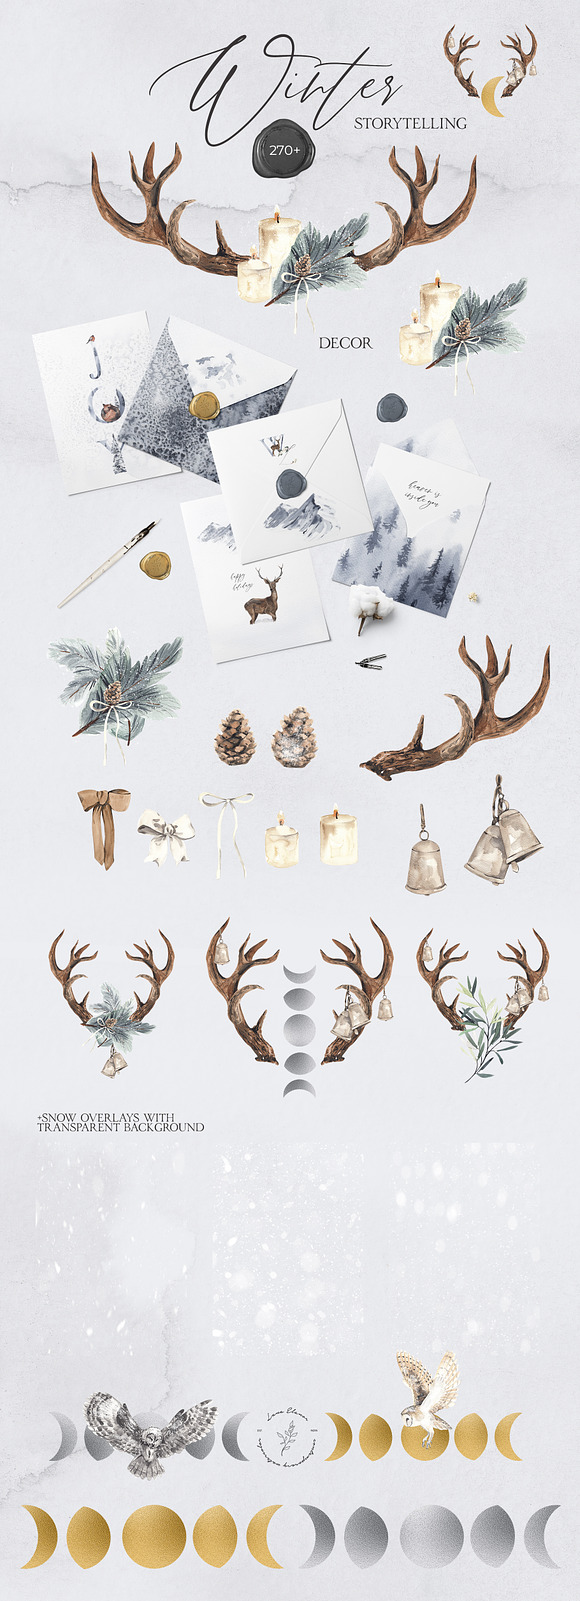 WINTER STORYTELLING Christmas set in Illustrations - product preview 11